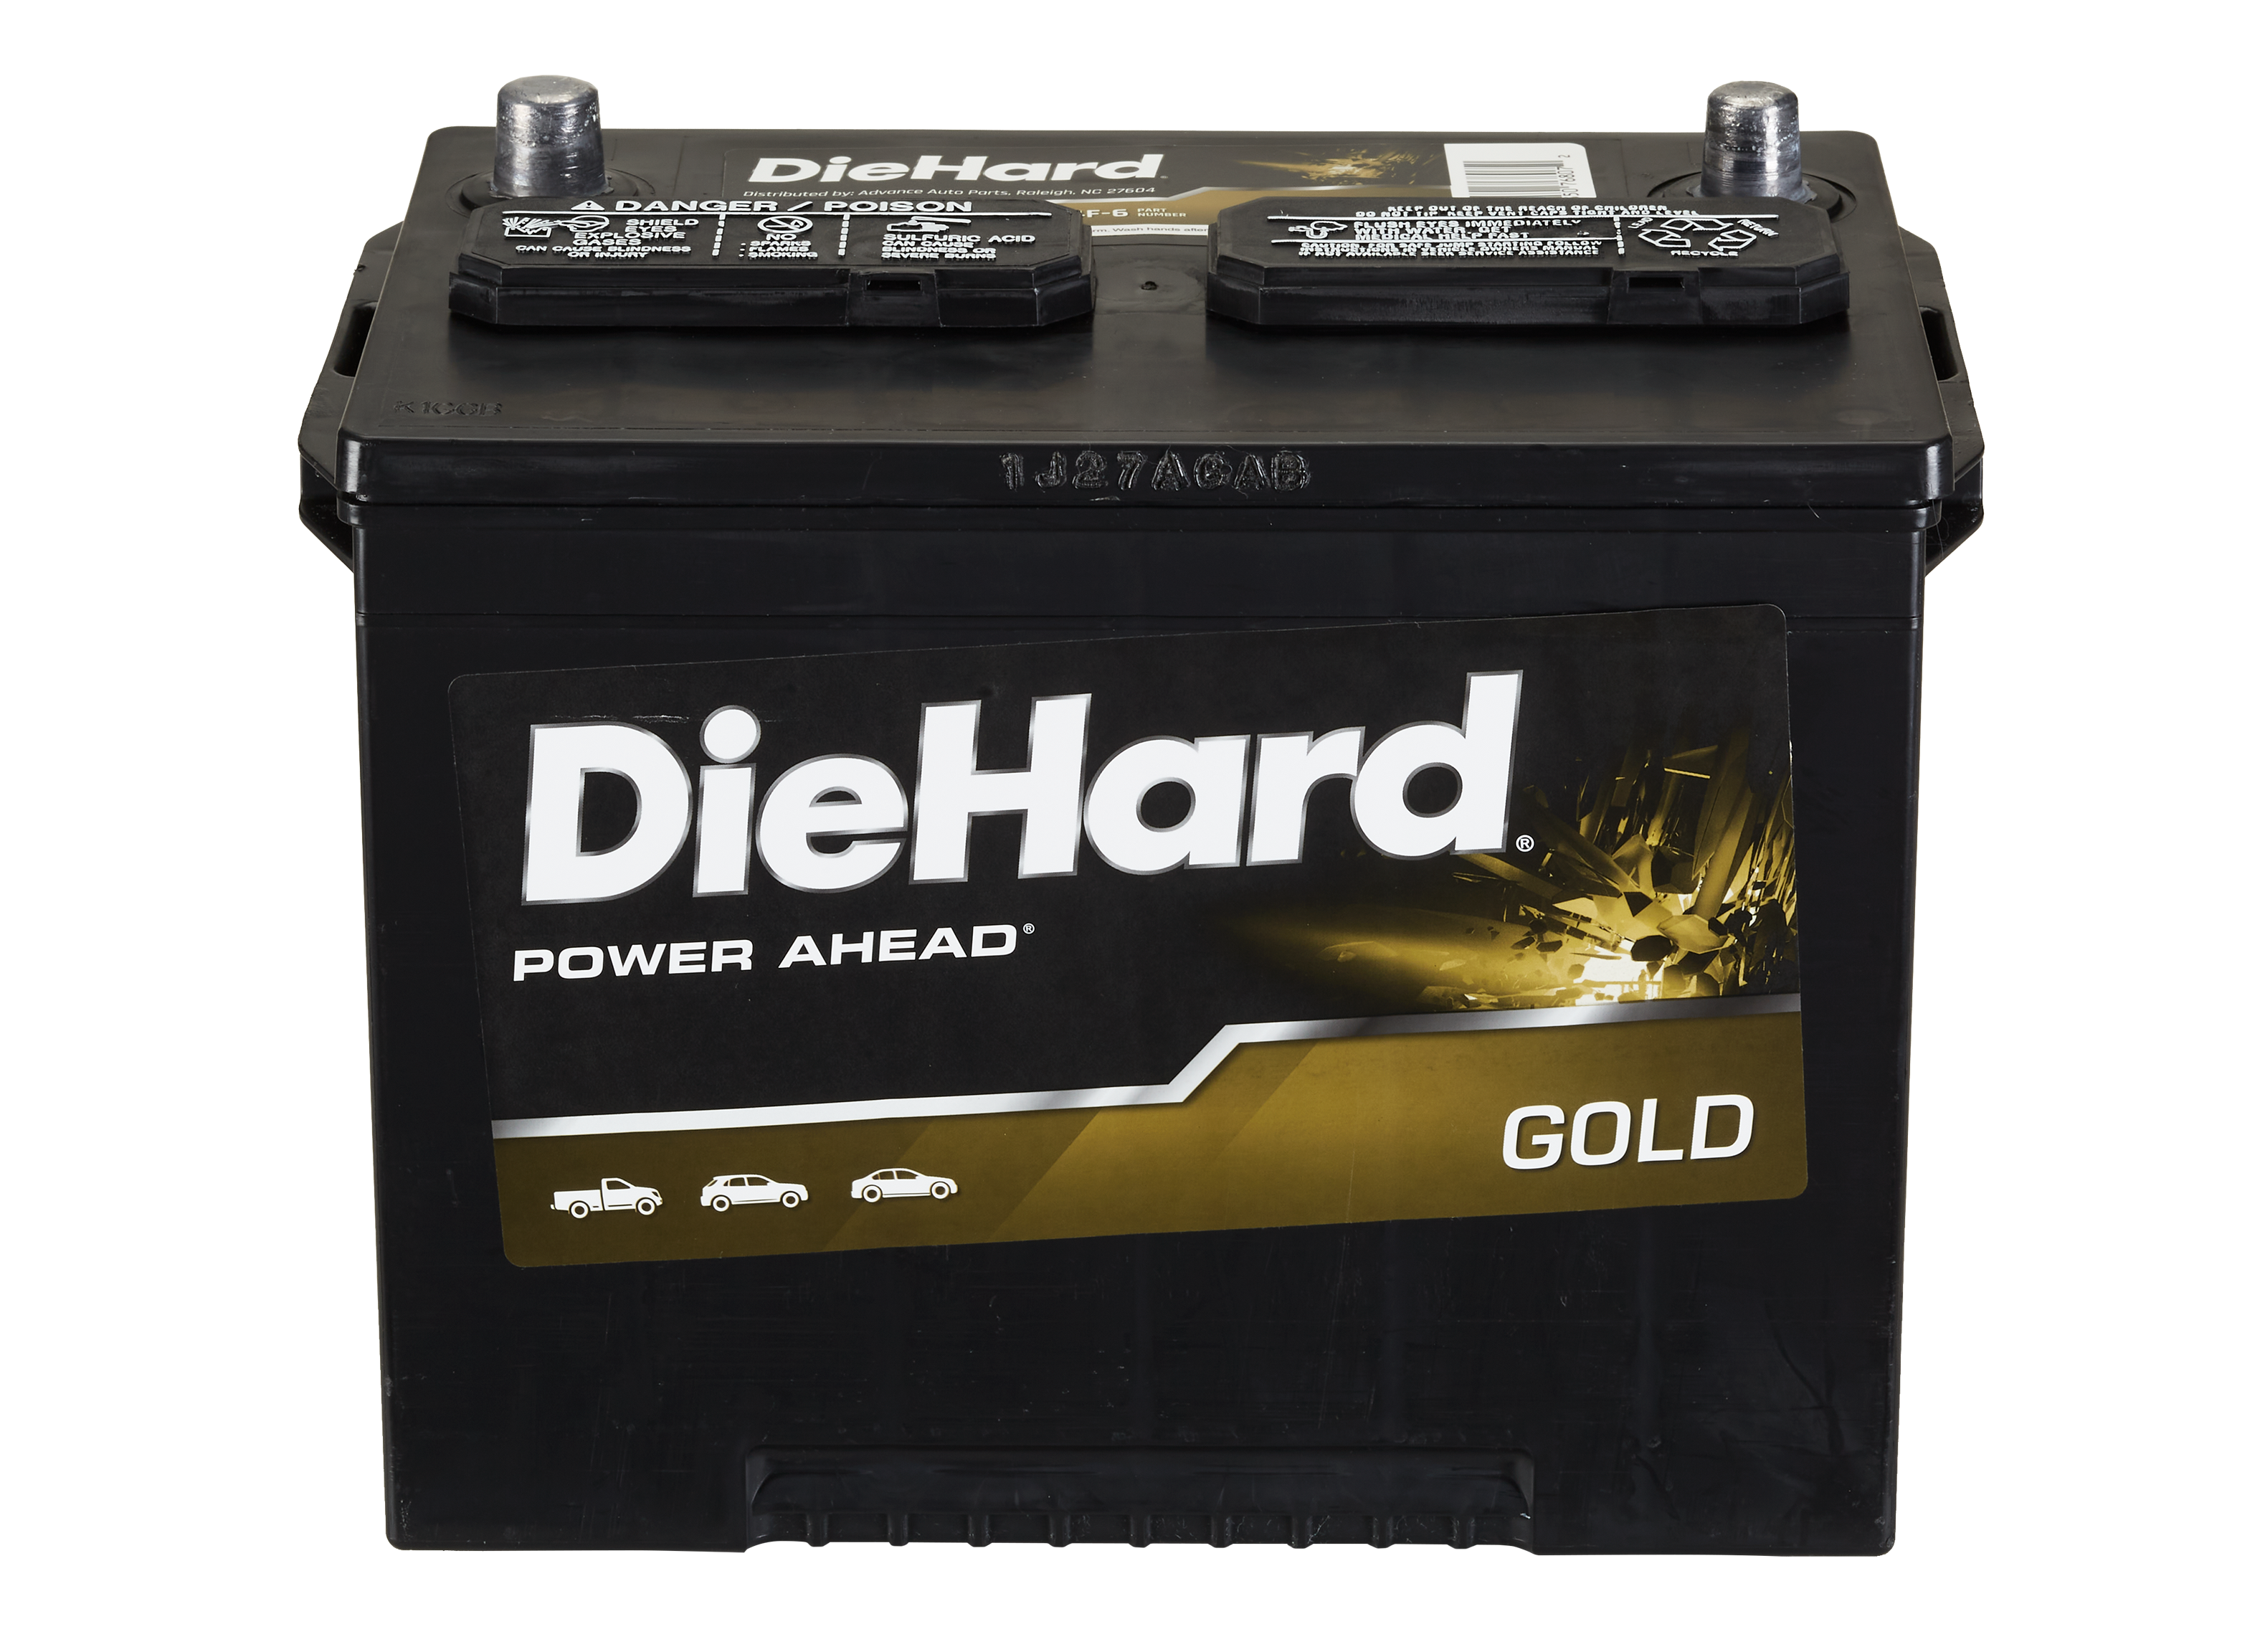 DieHard Gold 24F-6 Car Battery Review - Consumer Reports